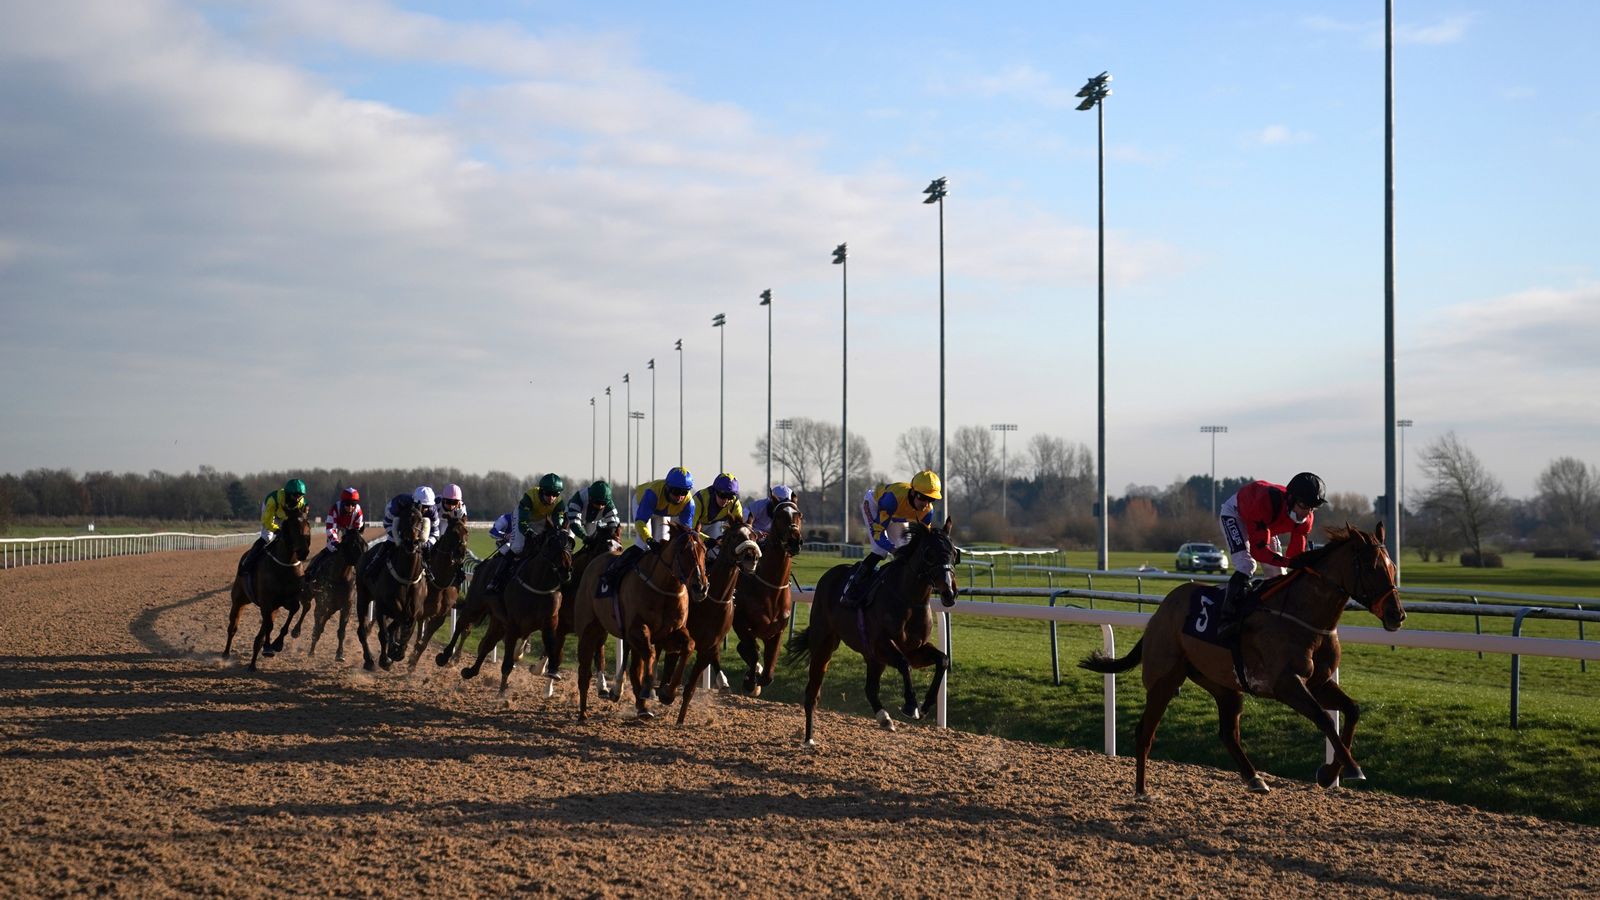 Southwell to stage jumpers’ bumper Sunday fixture as weather threatens meetings